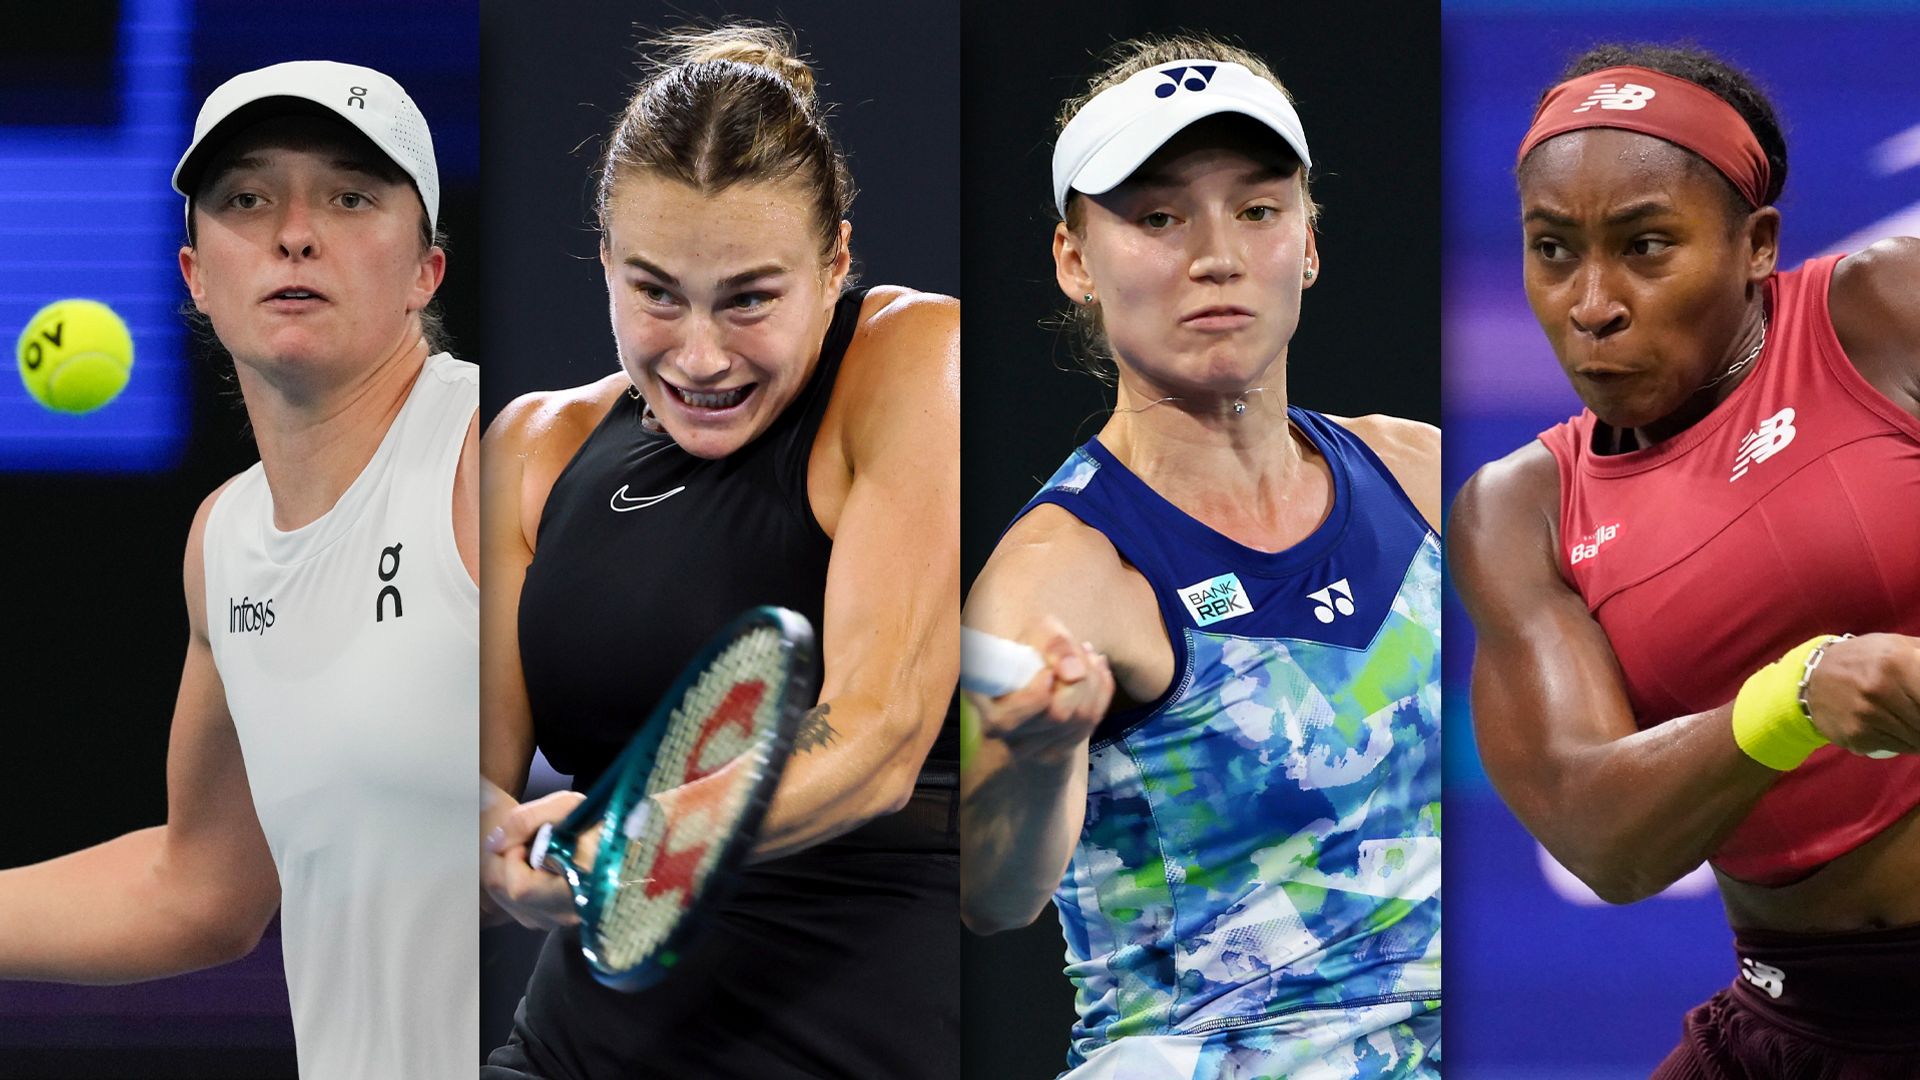 Will the new women's 'Big Four' emerge at Australian Open?